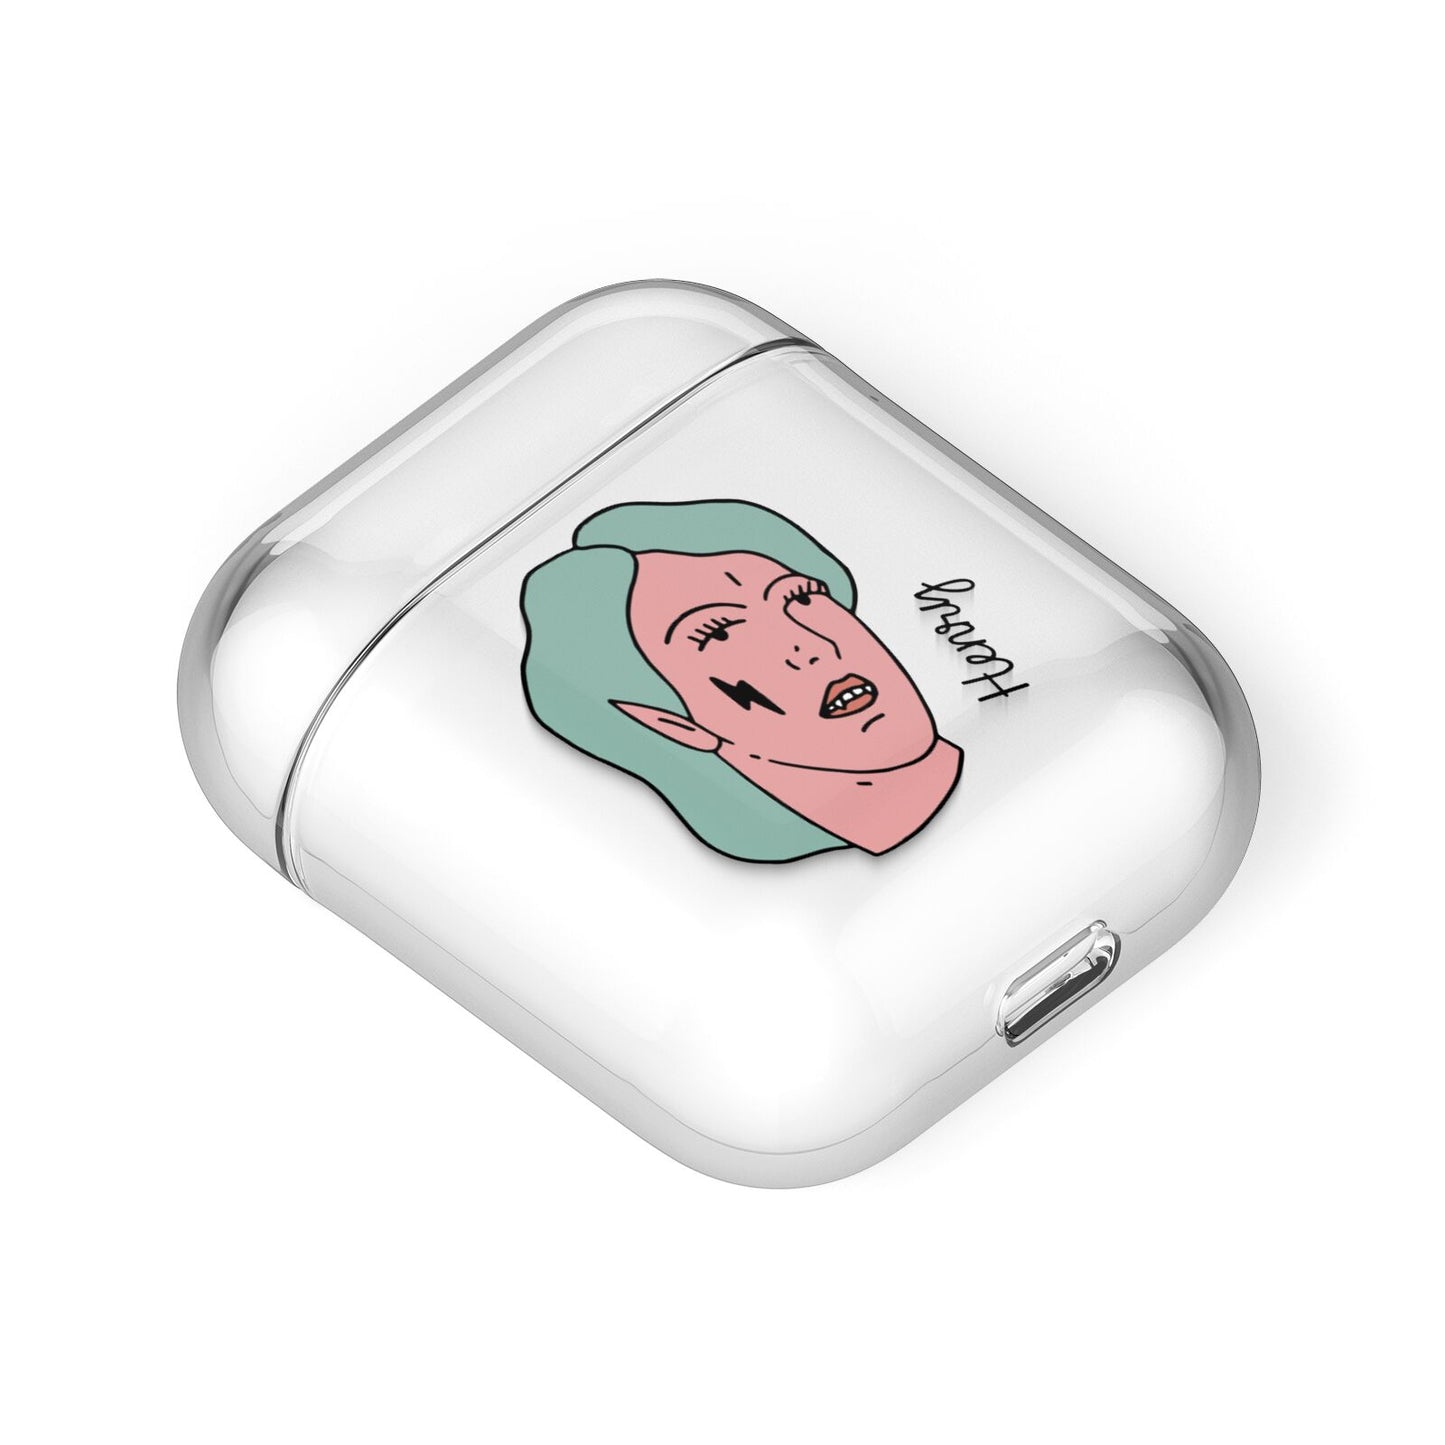 Lightning Fang Face Custom AirPods Case Laid Flat